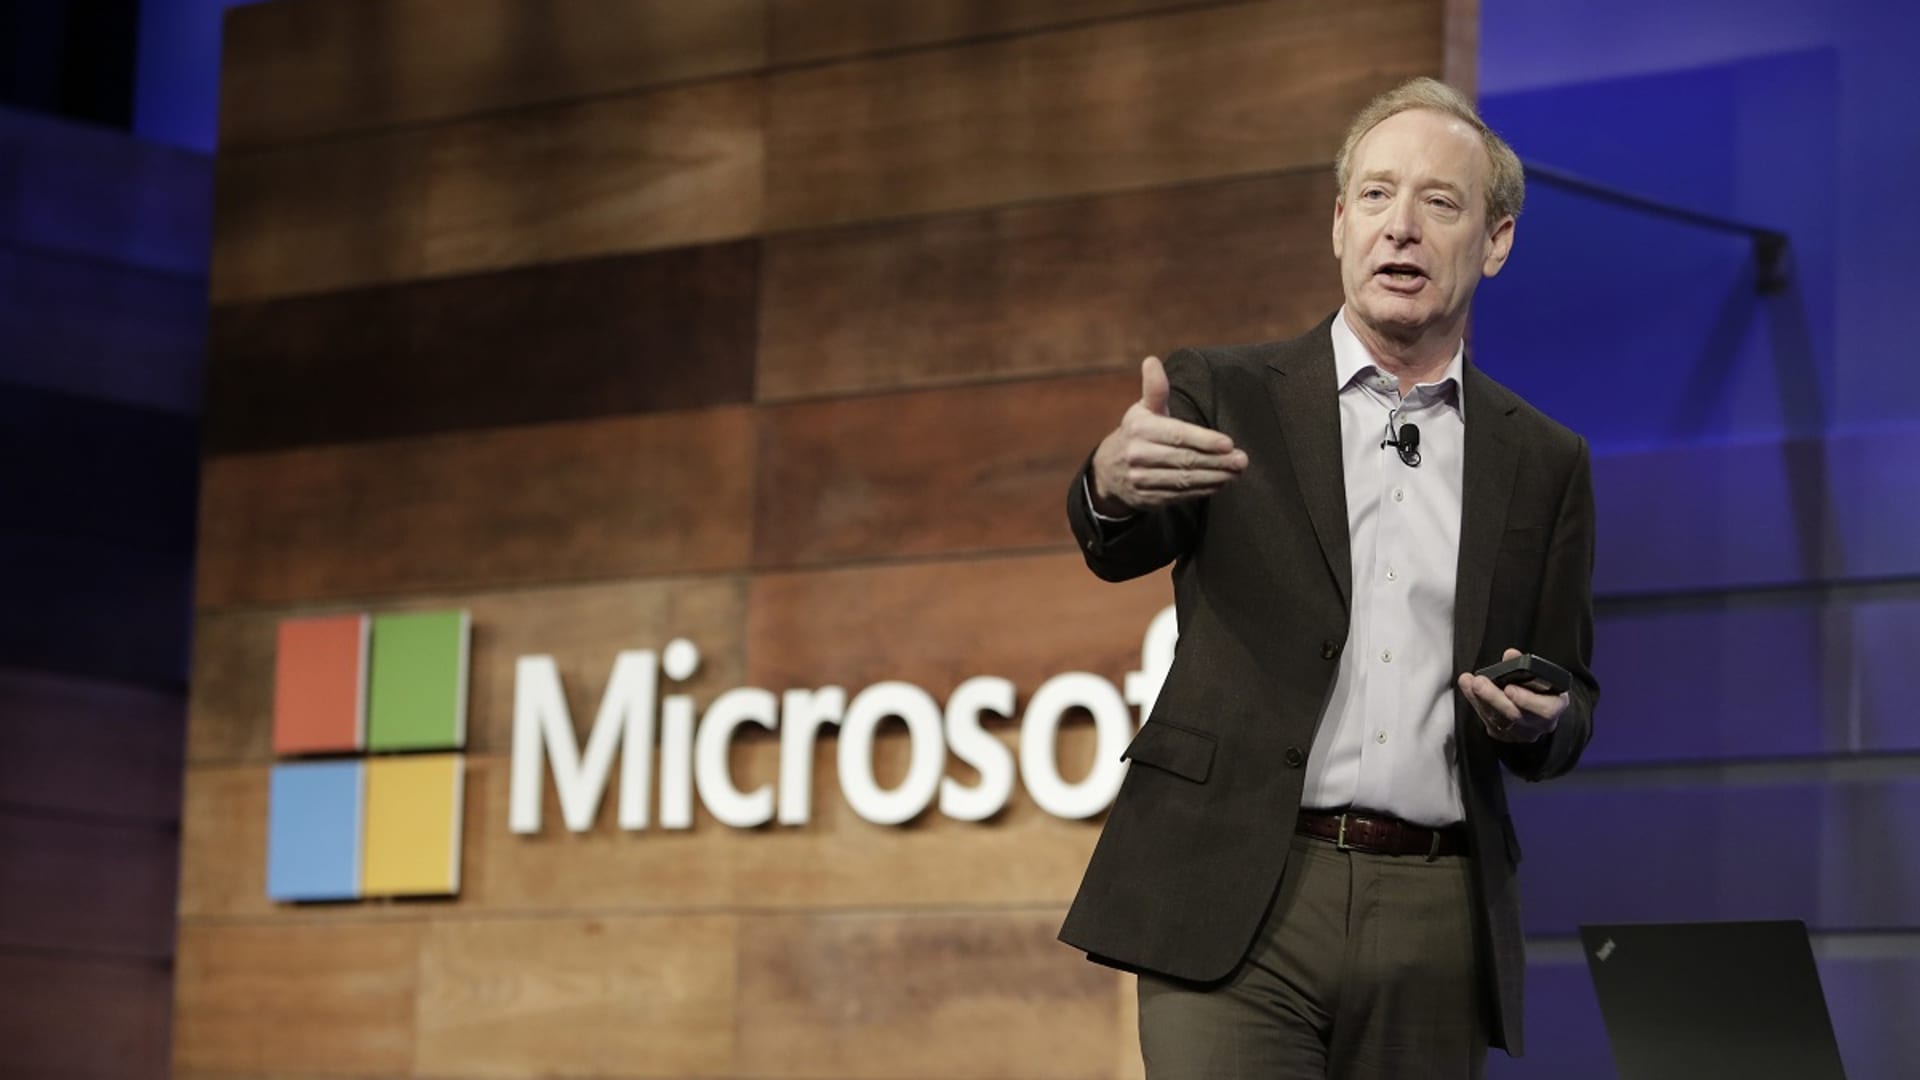 Microsoft President and Chief Legal Officer Brad Smith speaks during the annual Microsoft shareholders meeting in Bellevue, Washington on November 29, 2017.